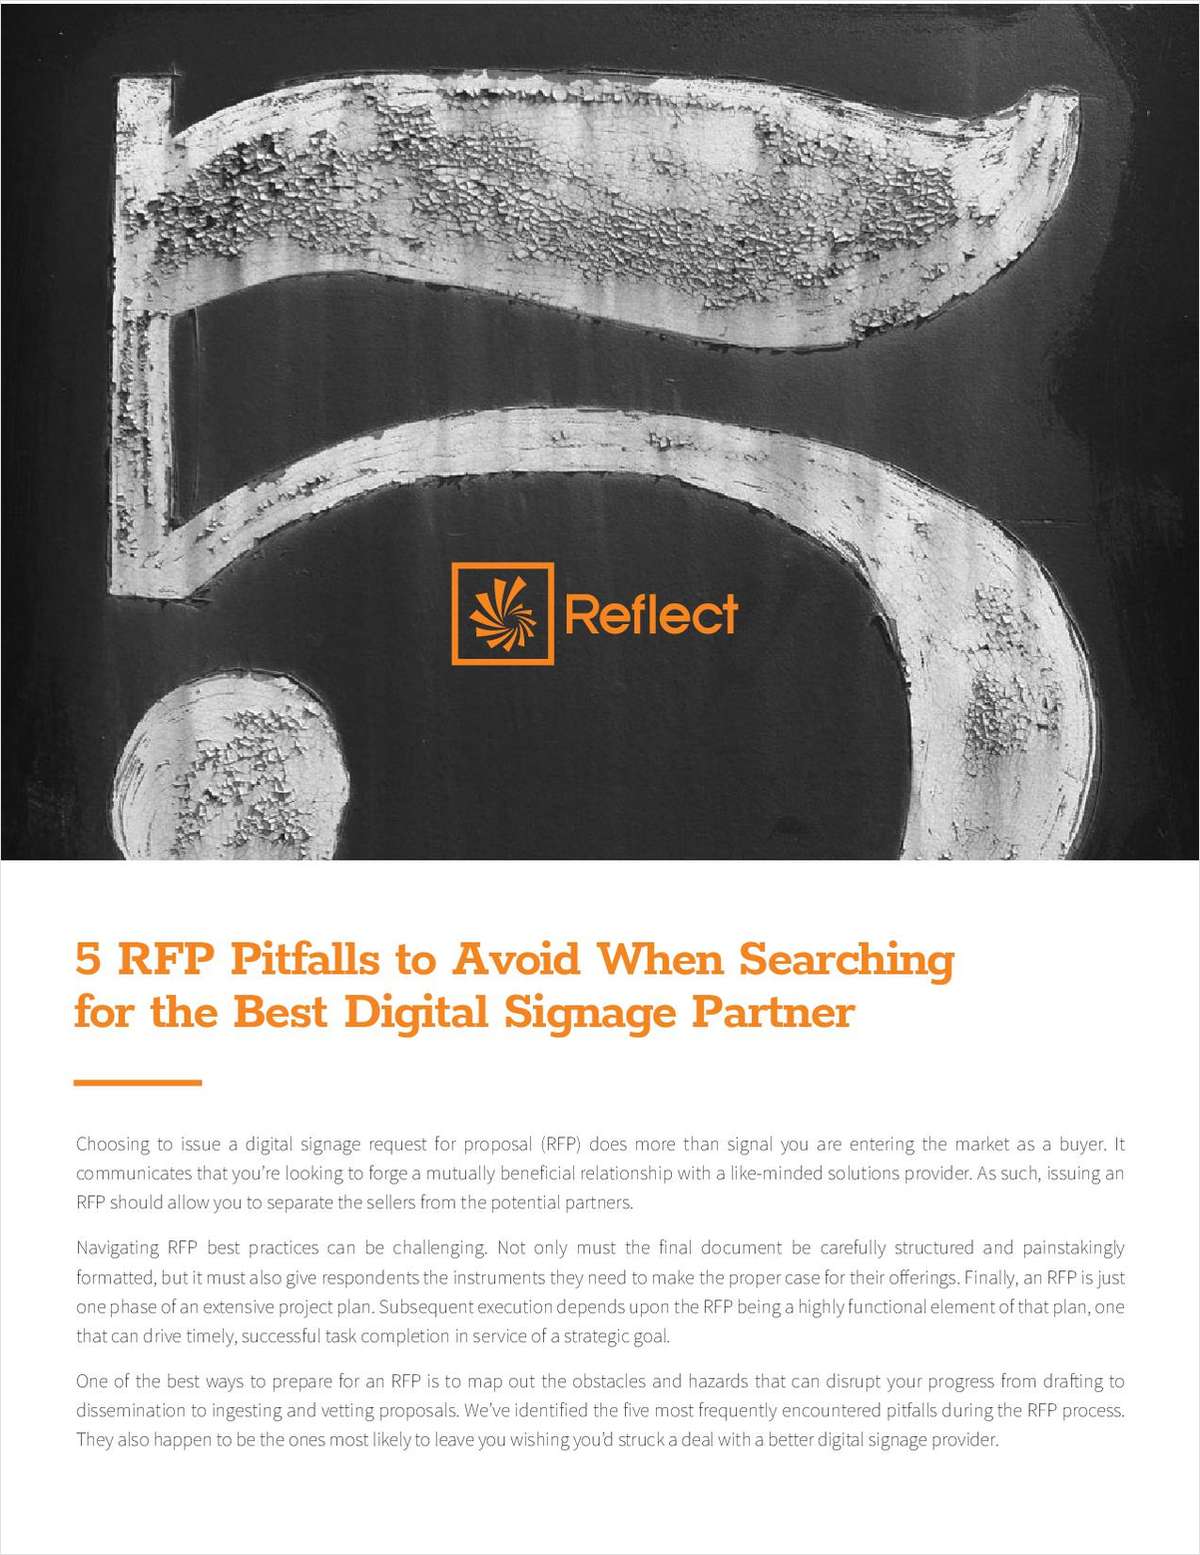 5 RFP Pitfalls to Avoid When Searching for the Best Digital Signage Partner